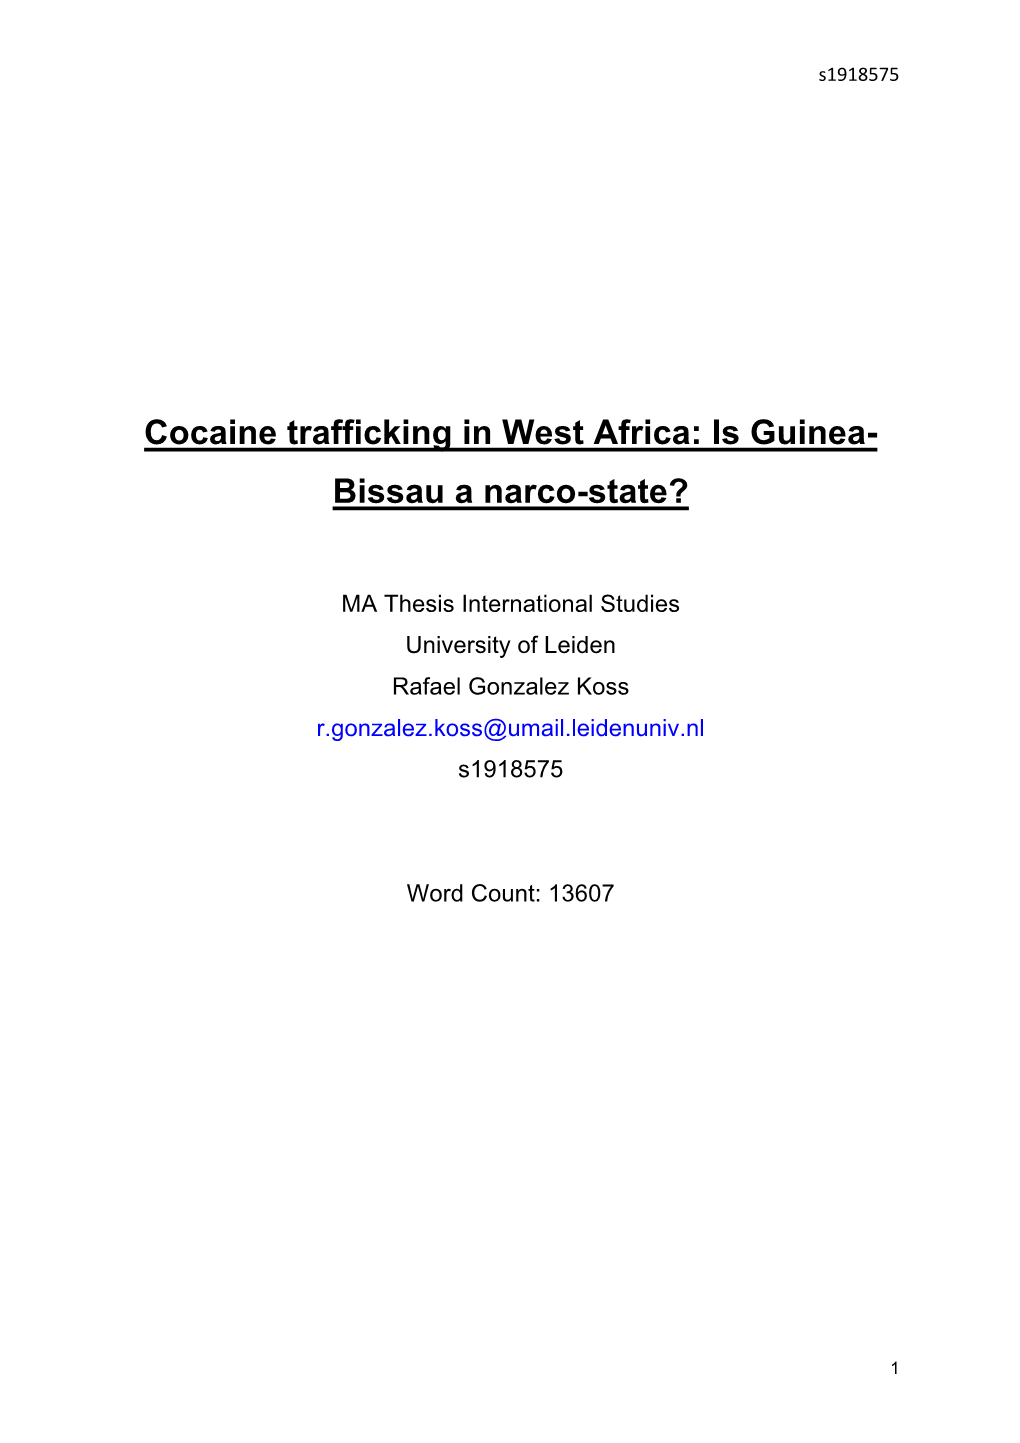 Is Guinea- Bissau a Narco-State?